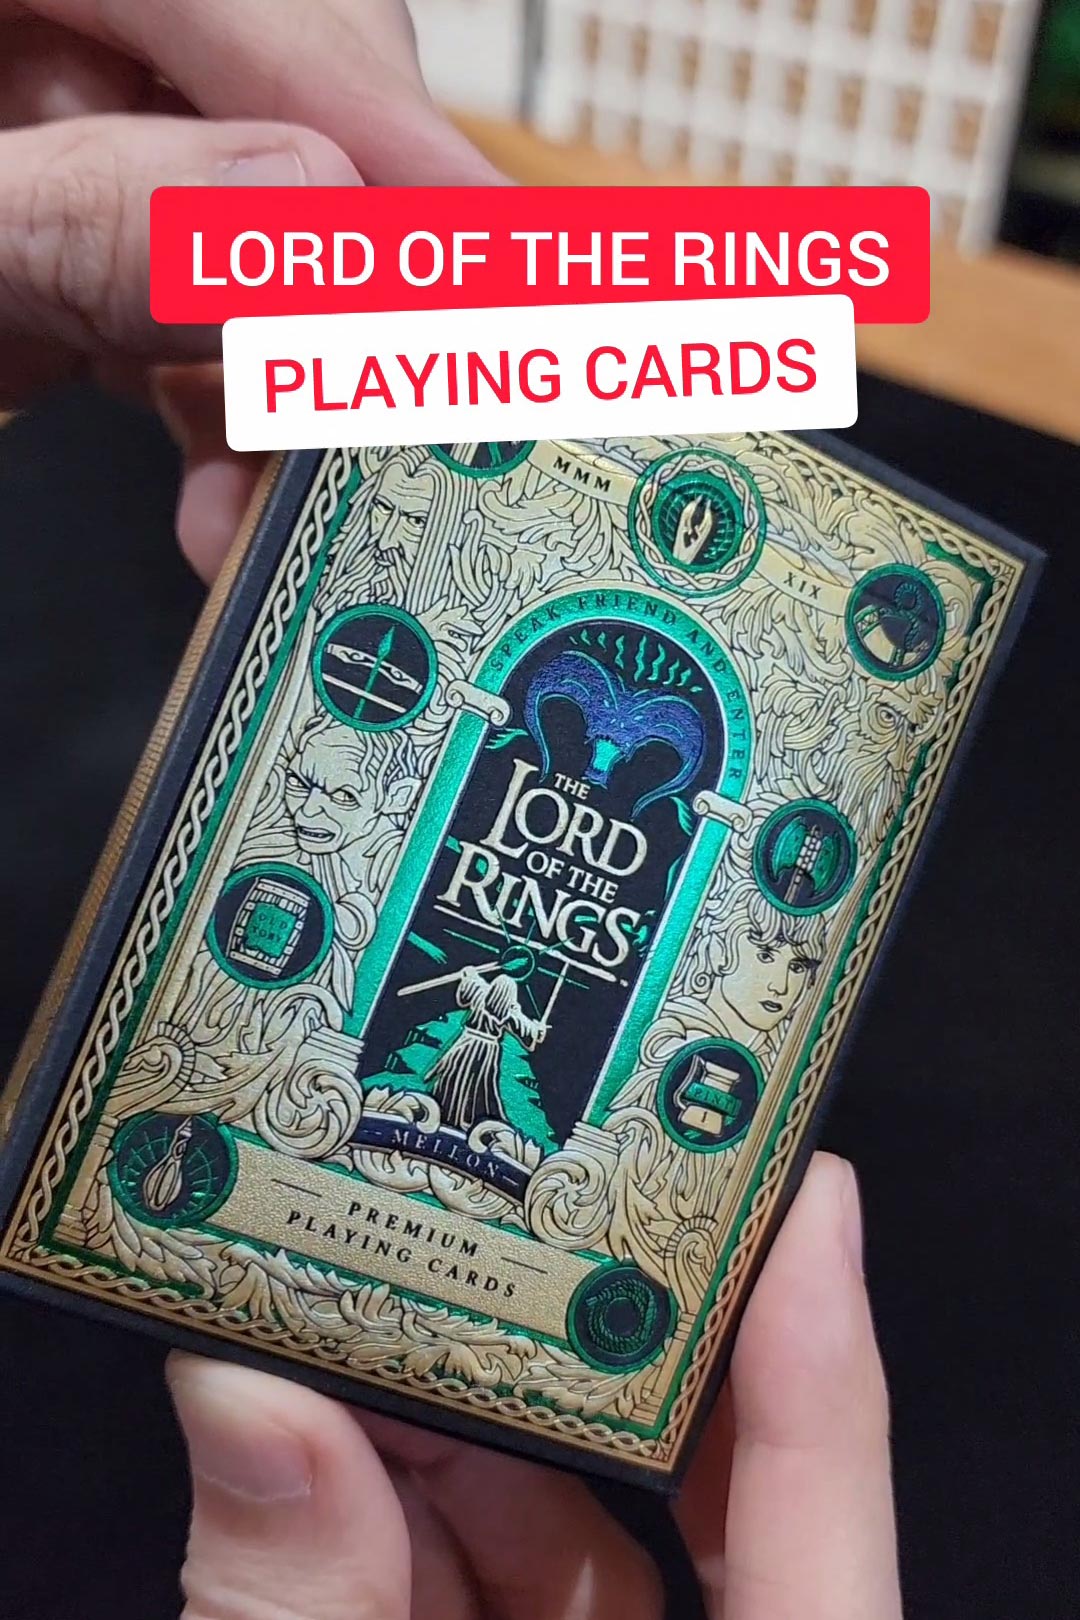 Unboxing Lord of the Rings Playing Cards by Theory11